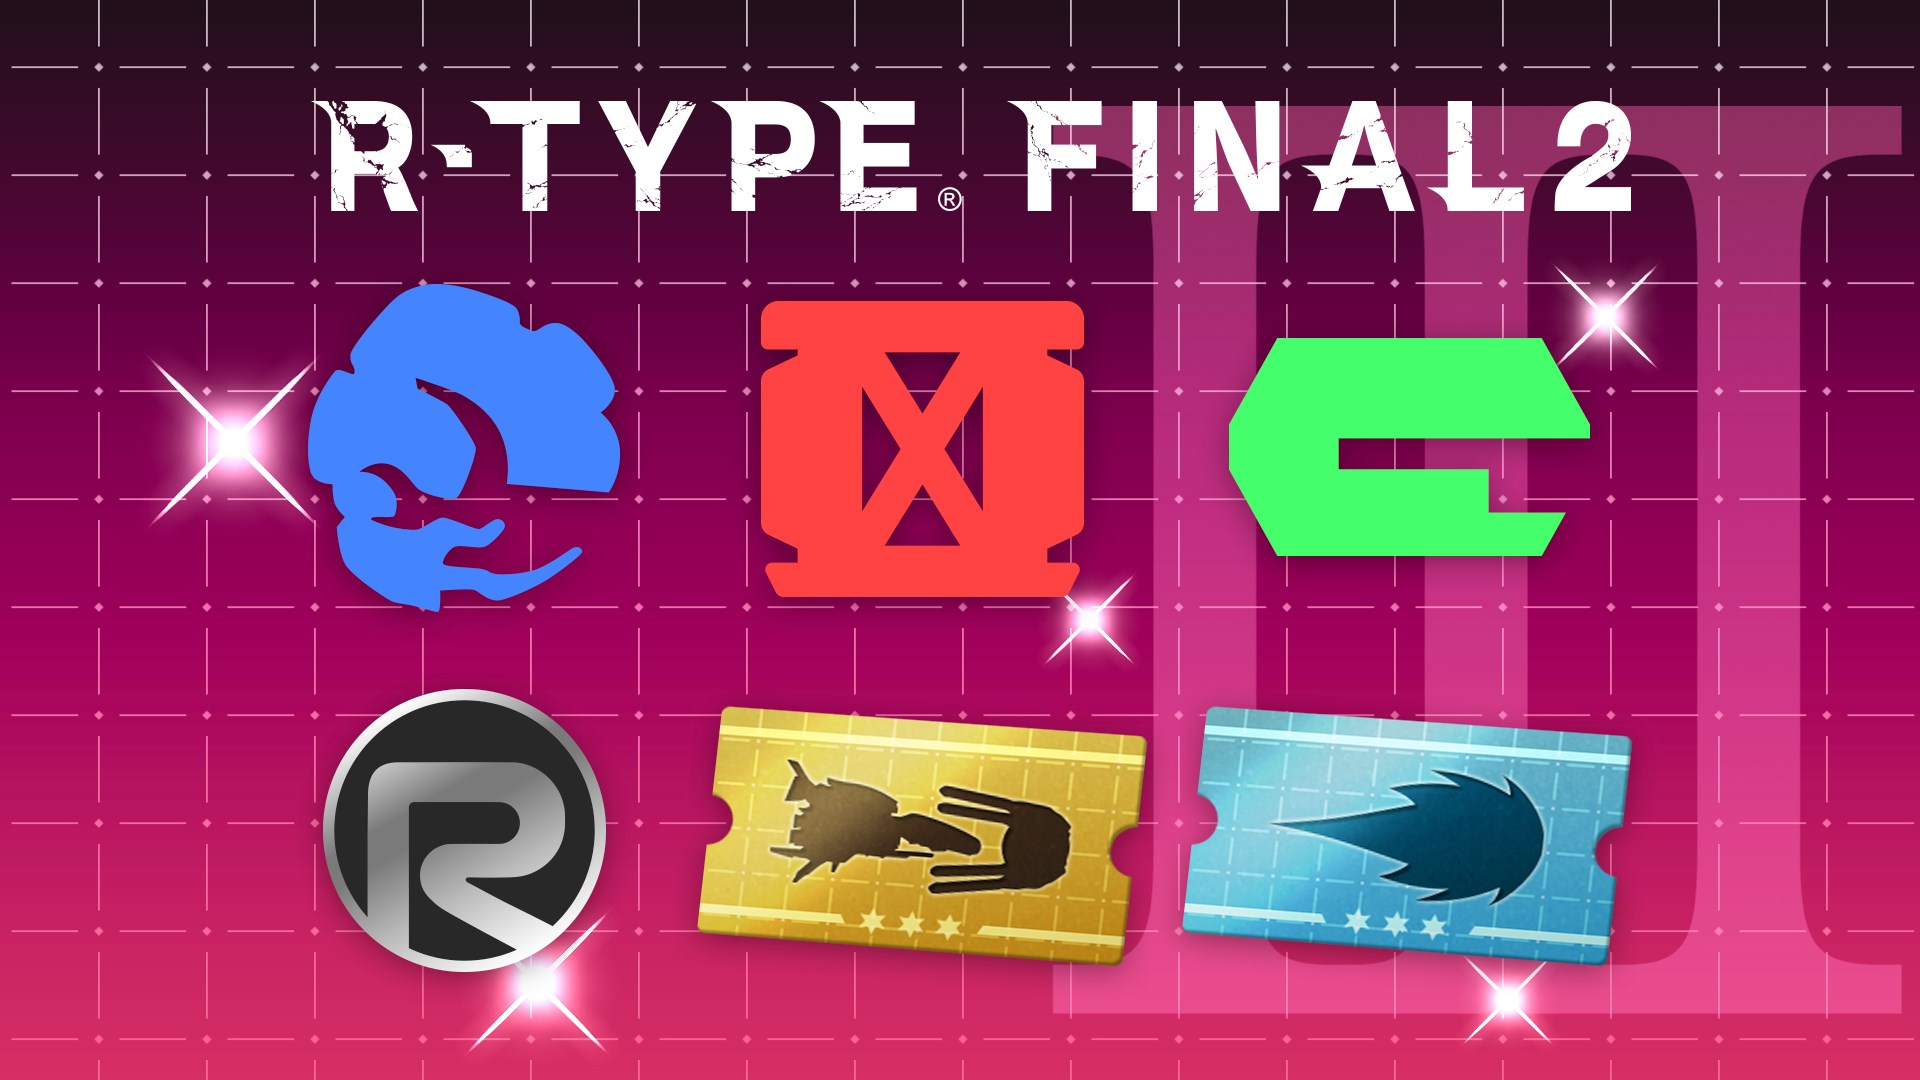 R-Type Final 2 PC: Ace Pilot Special Training Pack III